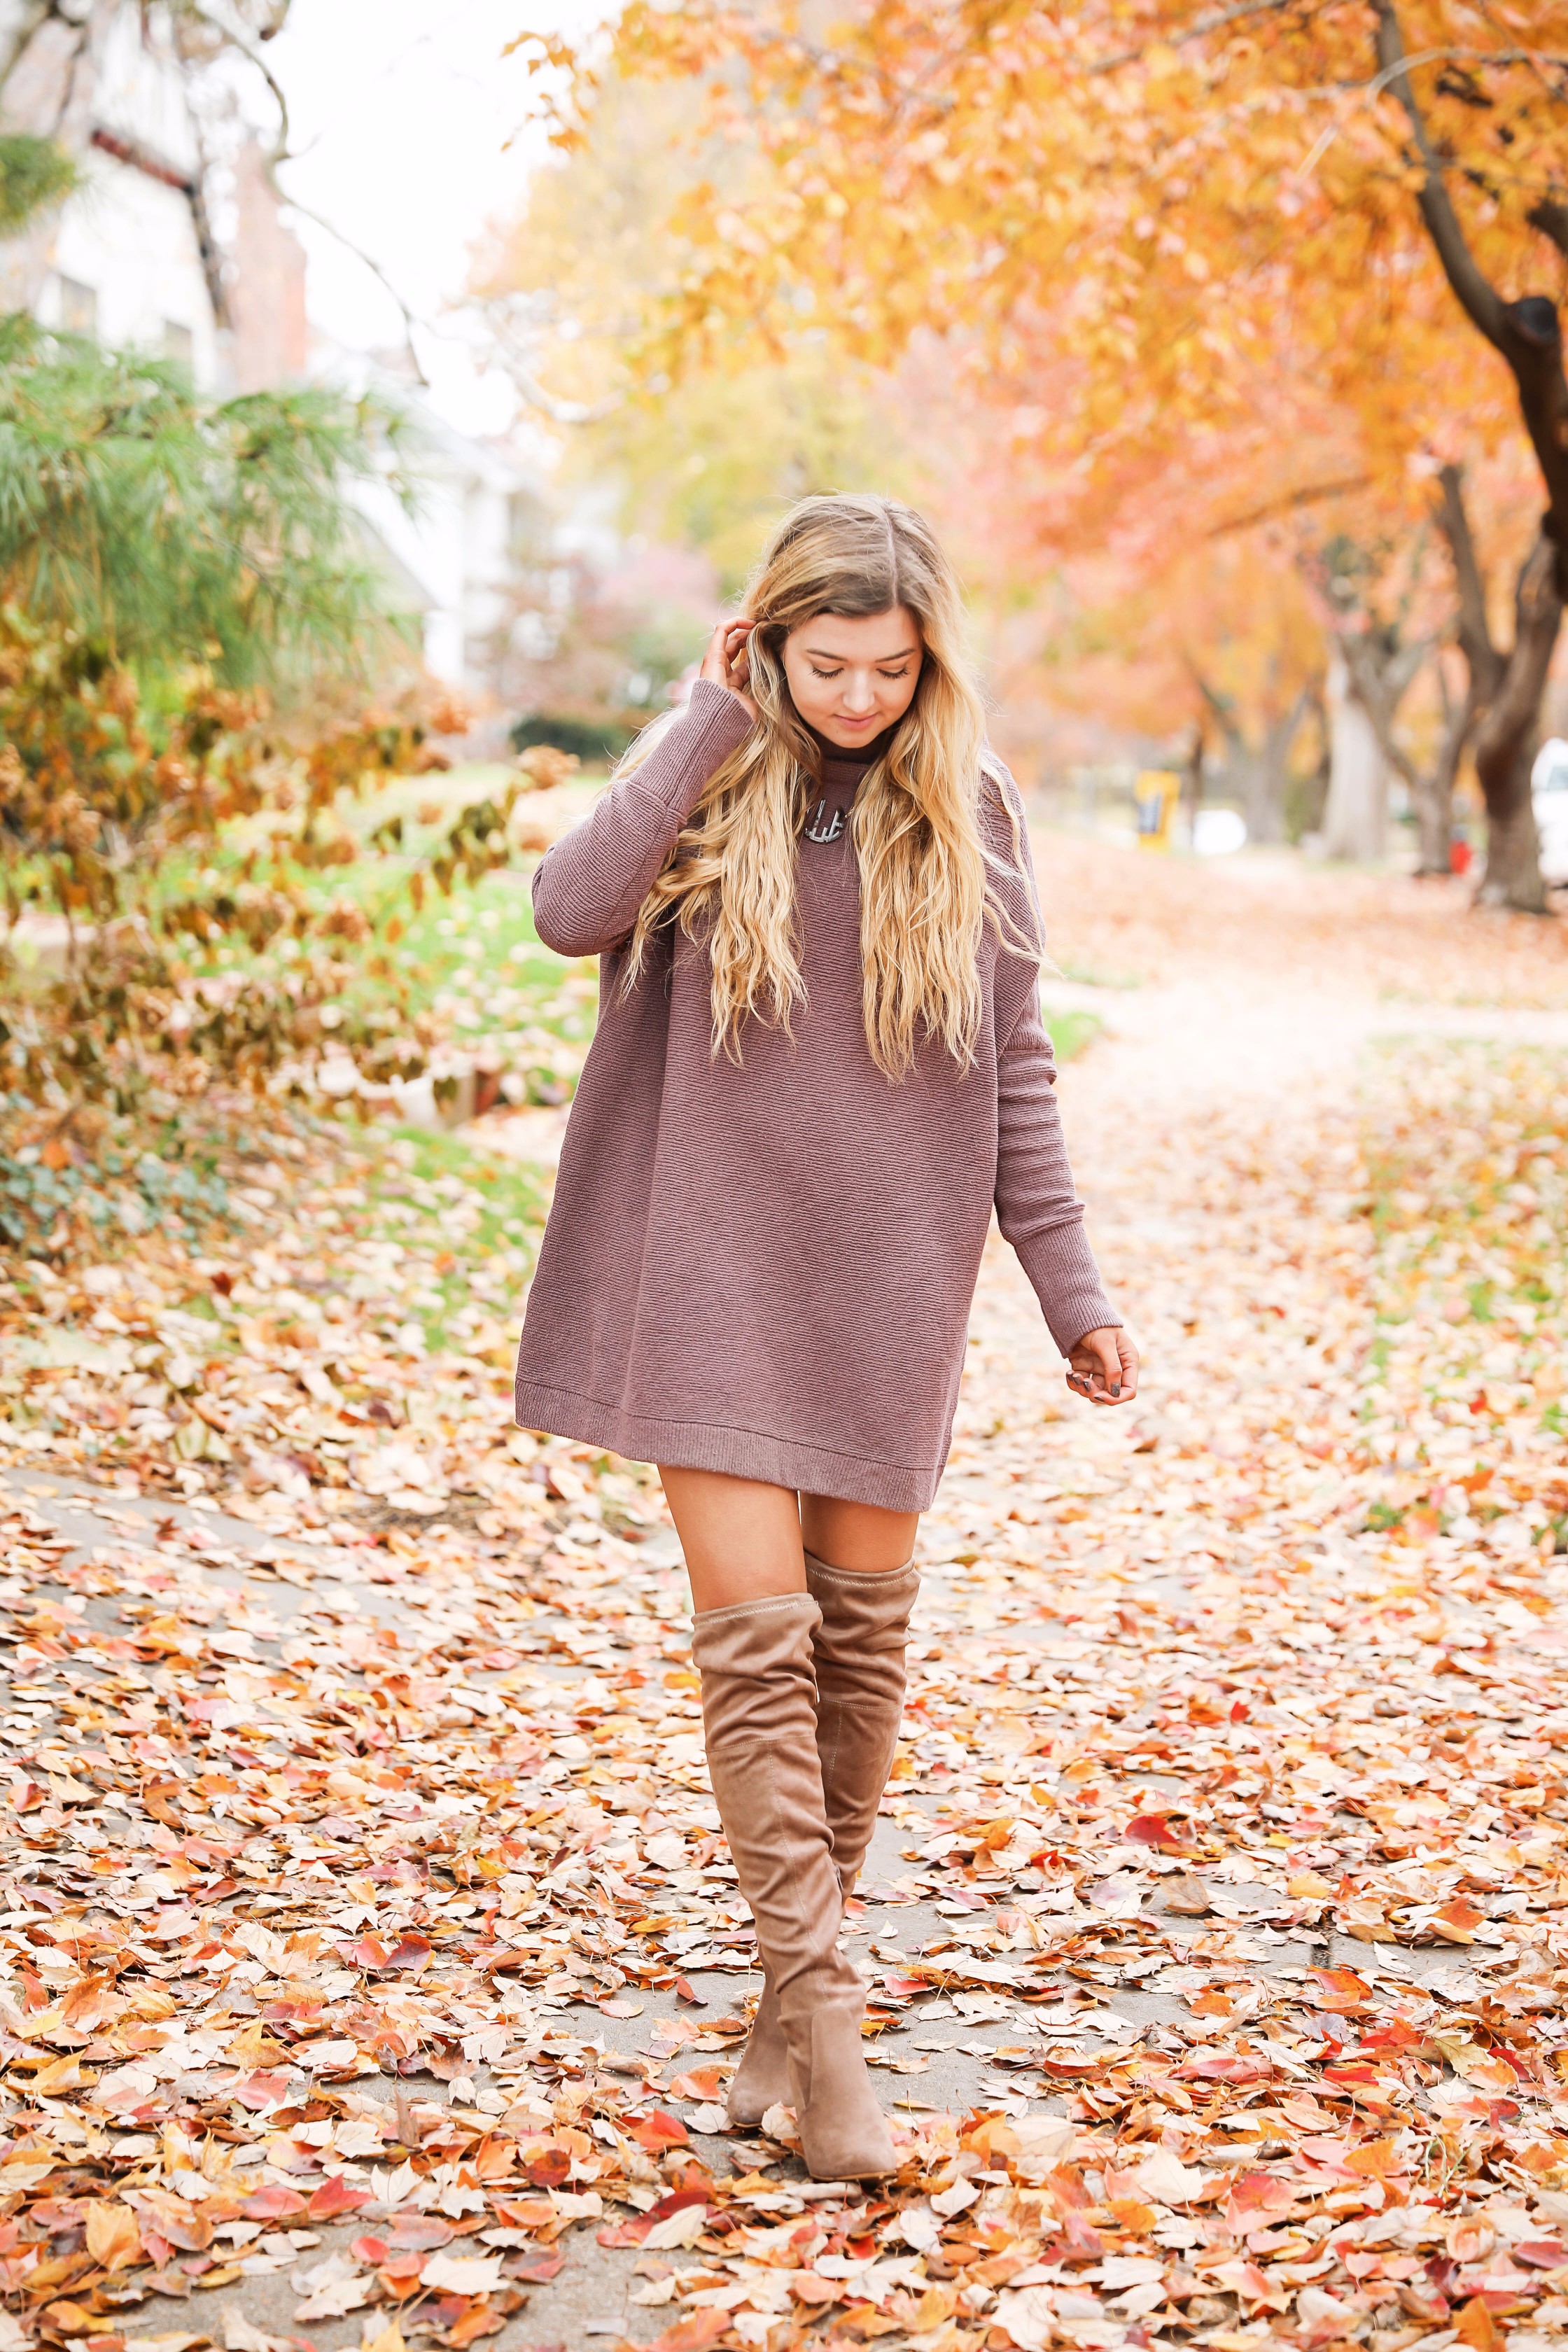 Purple free people Ottoman Slouchy Tunics weater dress! This cute fall look is perfect paired with brown suede over the knee boots! Find the details on fashion blog daily dose of charm by lauren lindmark